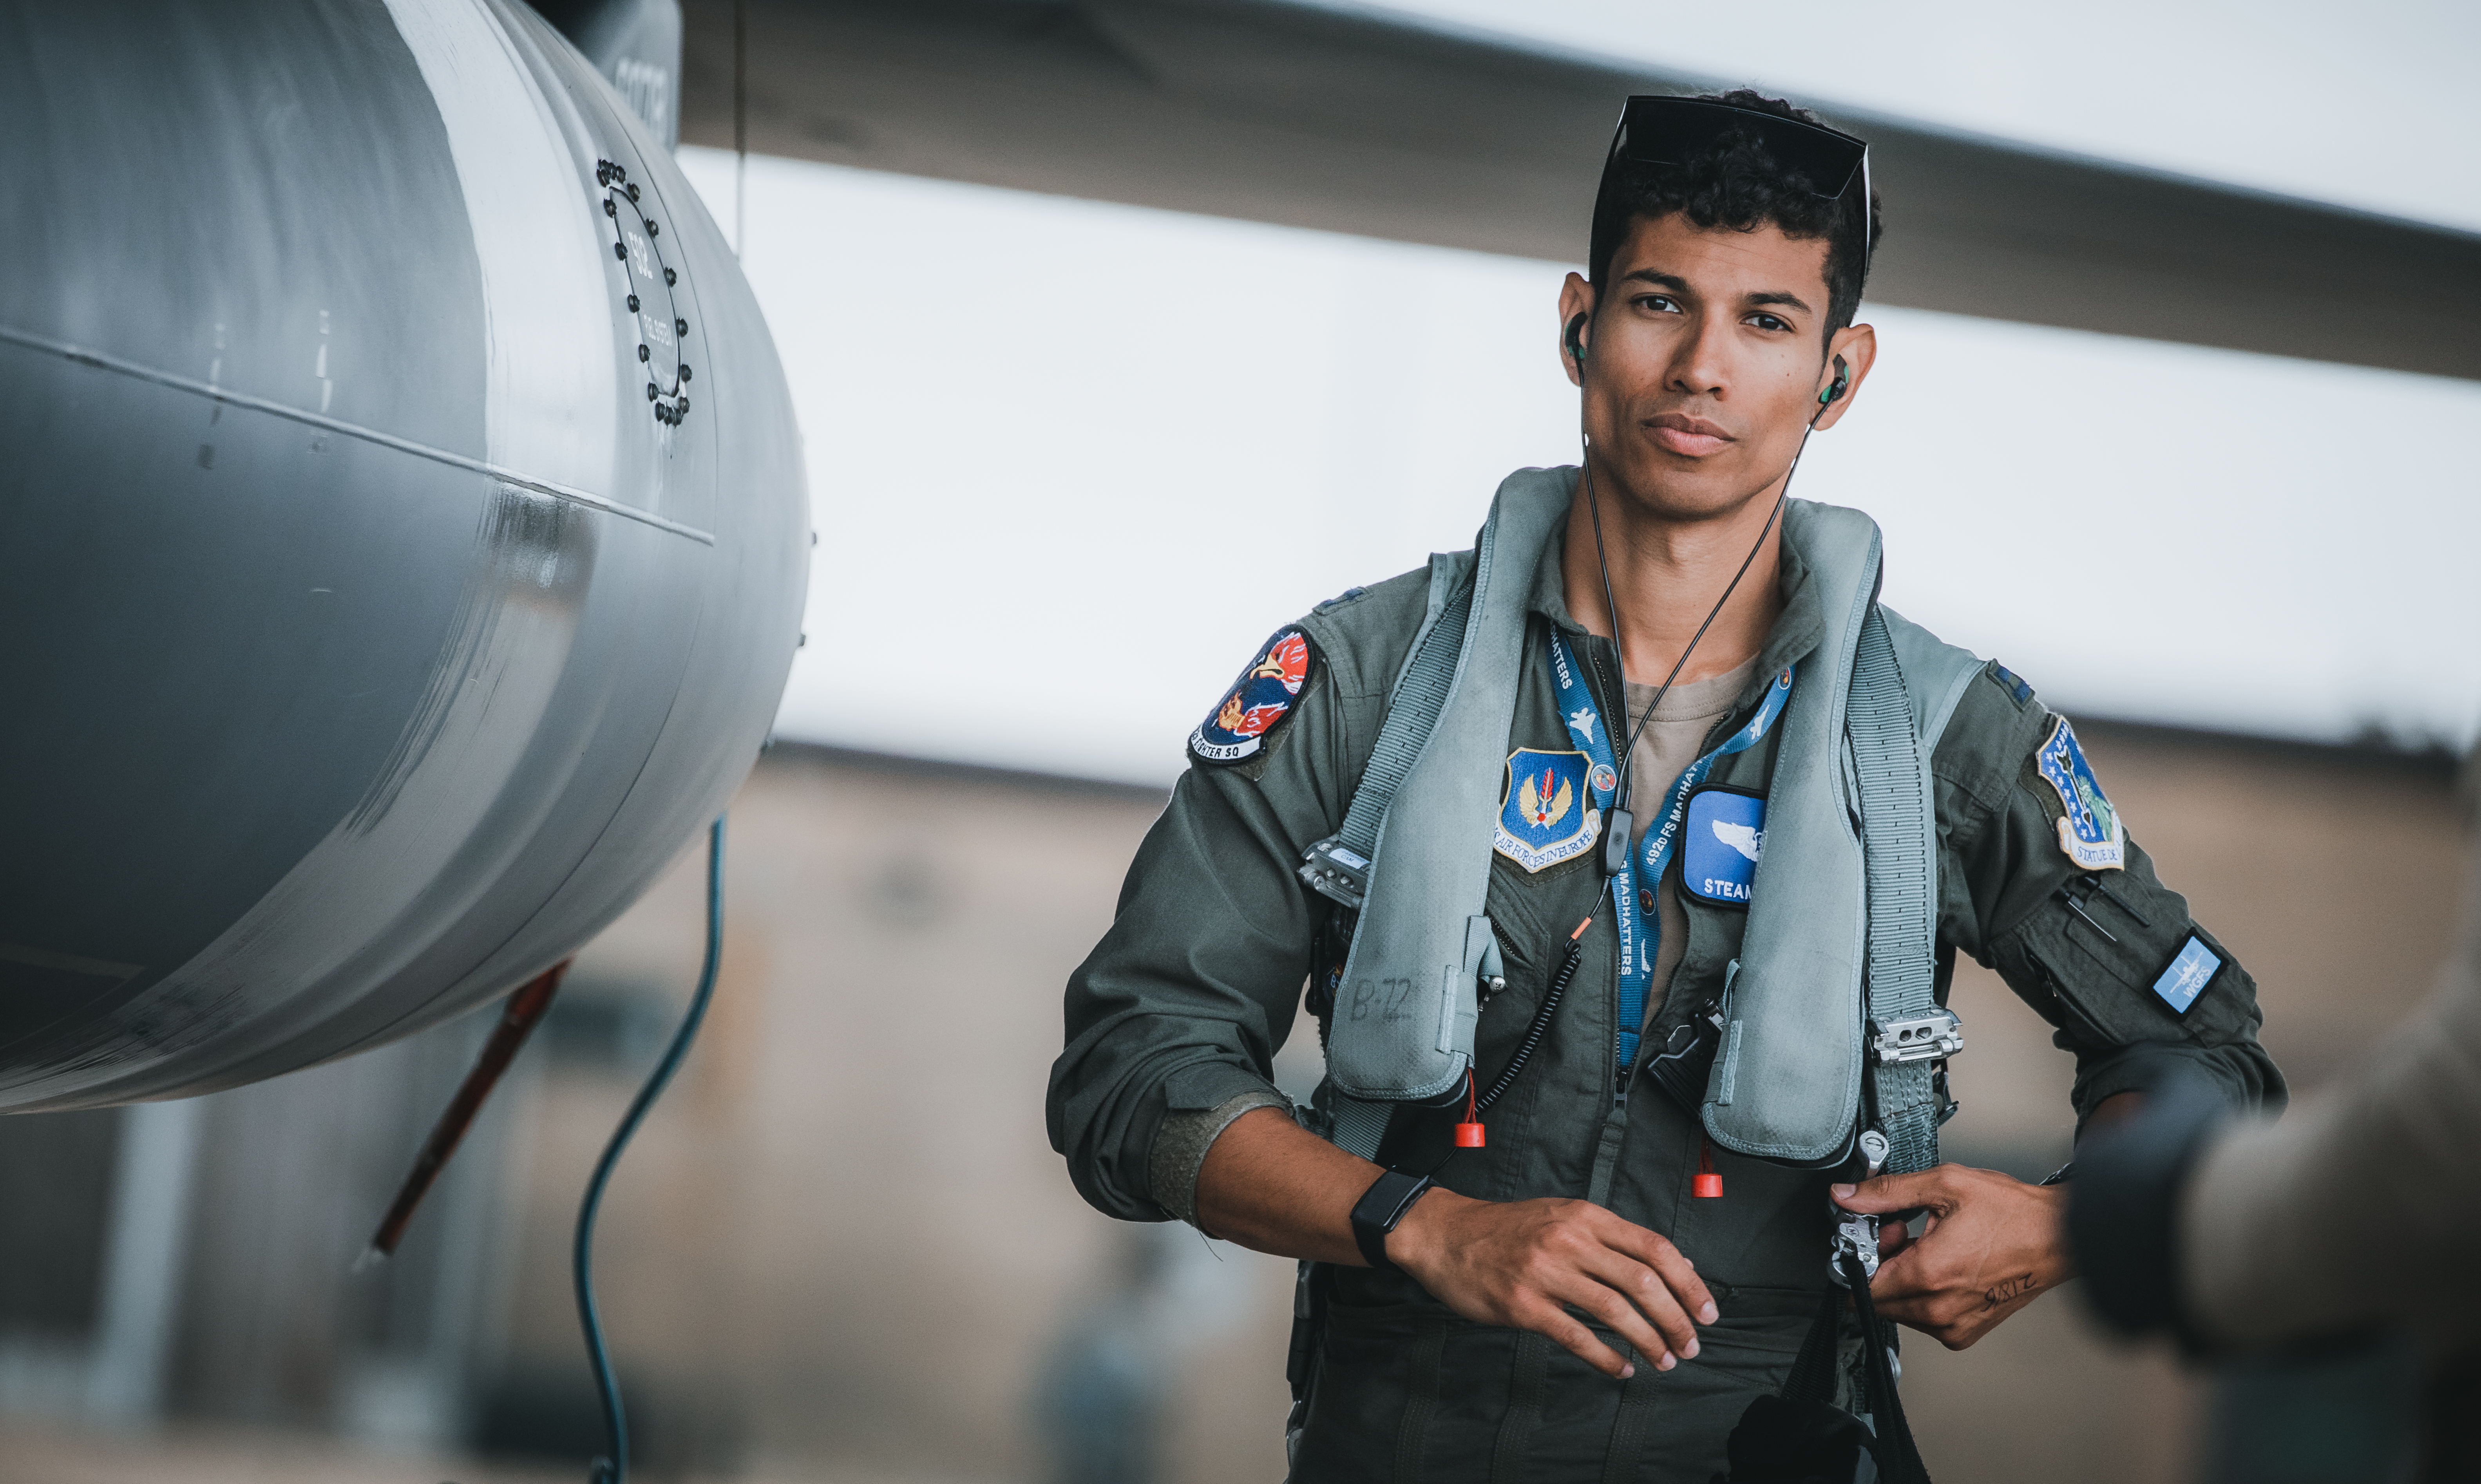 Image shows United States Air Force airman by his aircraft.